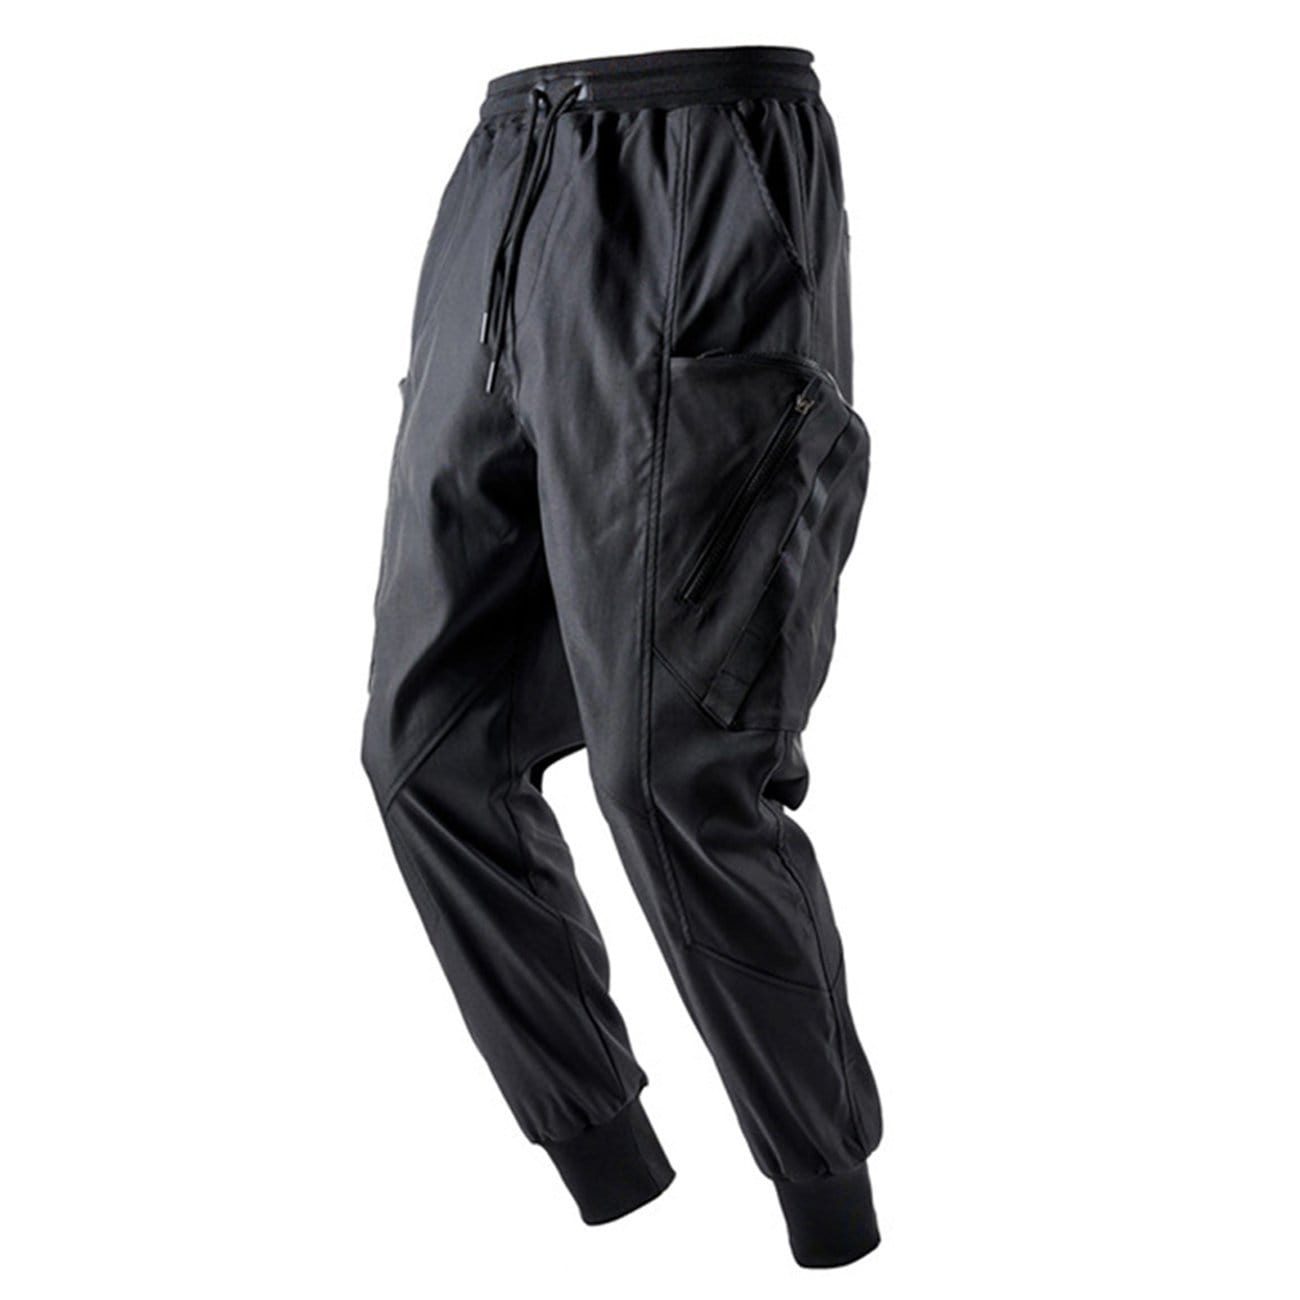 TO Combat Curved Pocket Cargo Pants